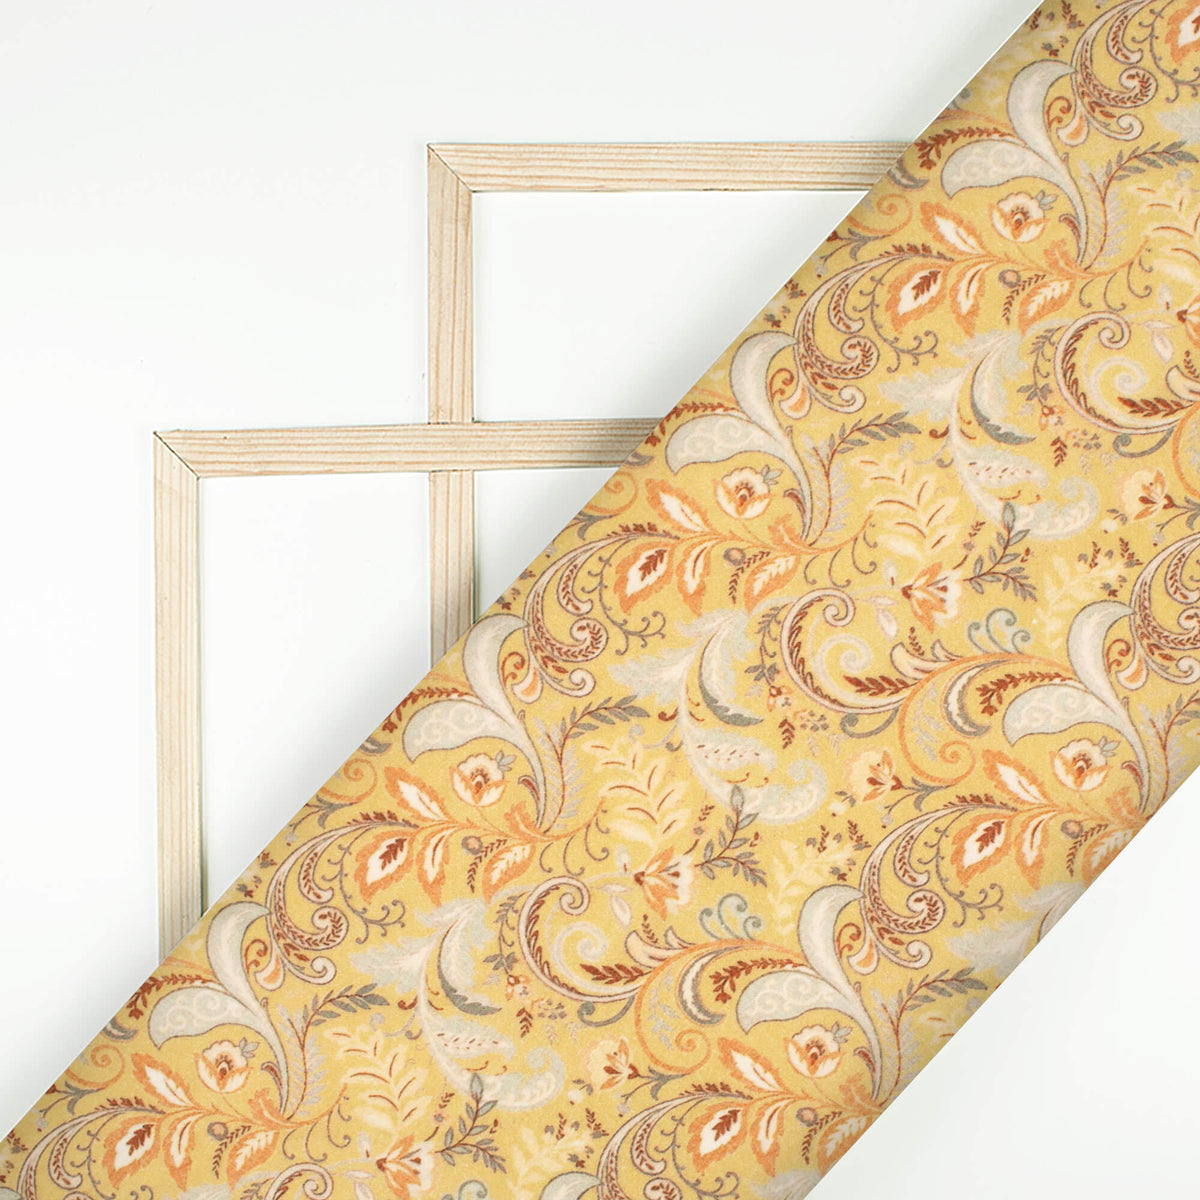 Dijon Yellow And Brown Floral Digital Print Cotton Cambric Fabric